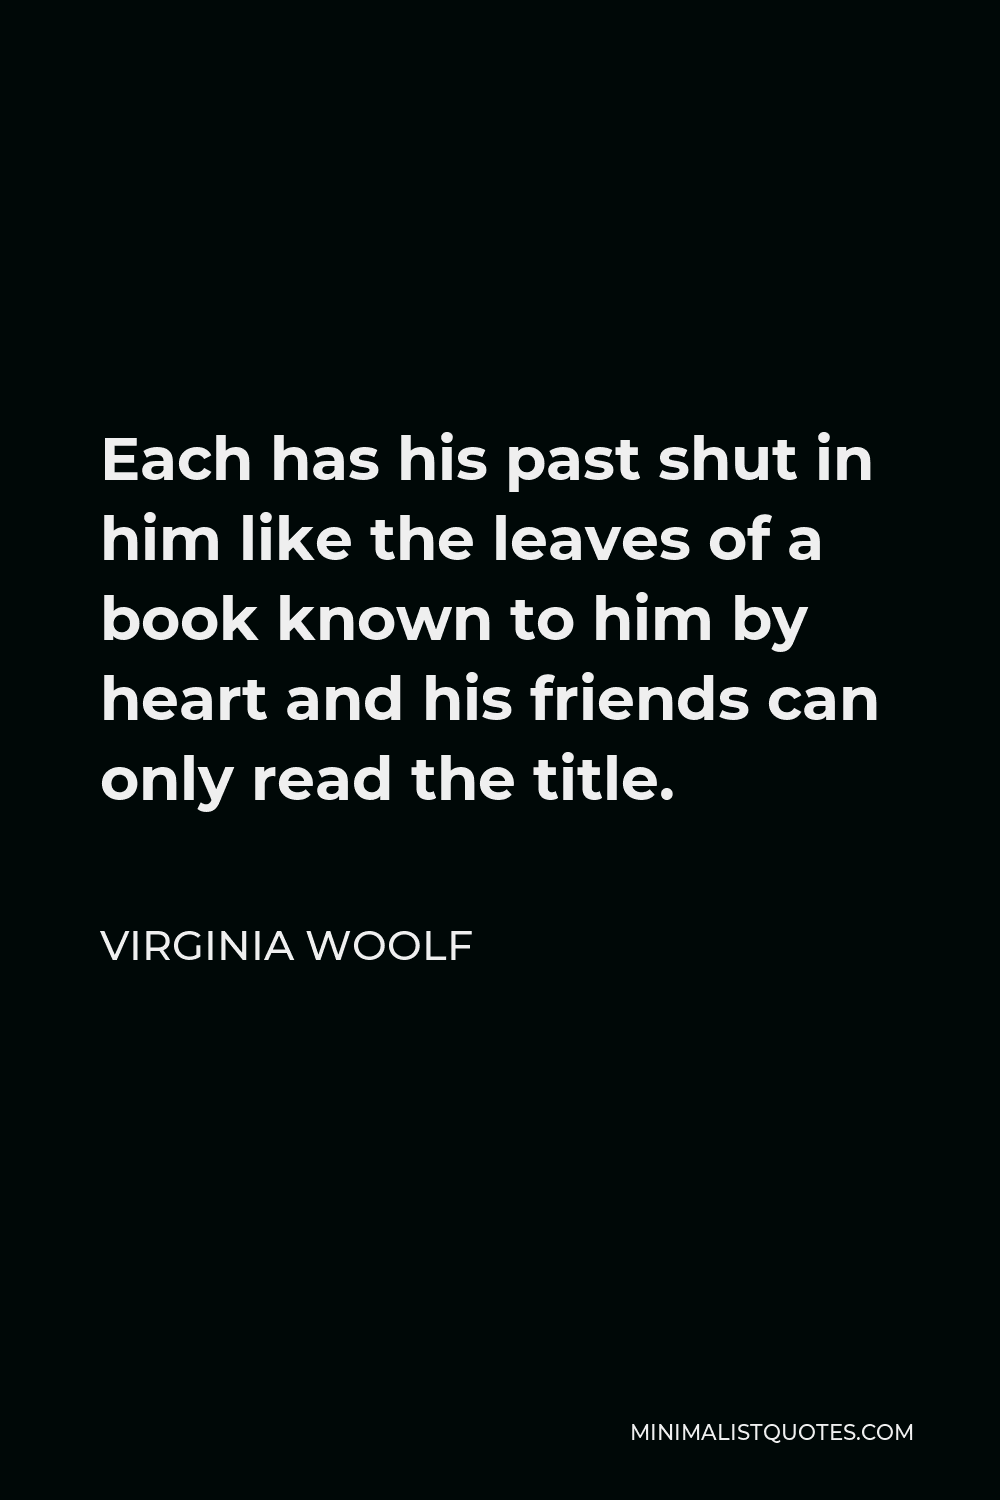 Virginia Woolf Quote - Each has his past shut in him like the leaves of a book known to him by heart and his friends can only read the title.